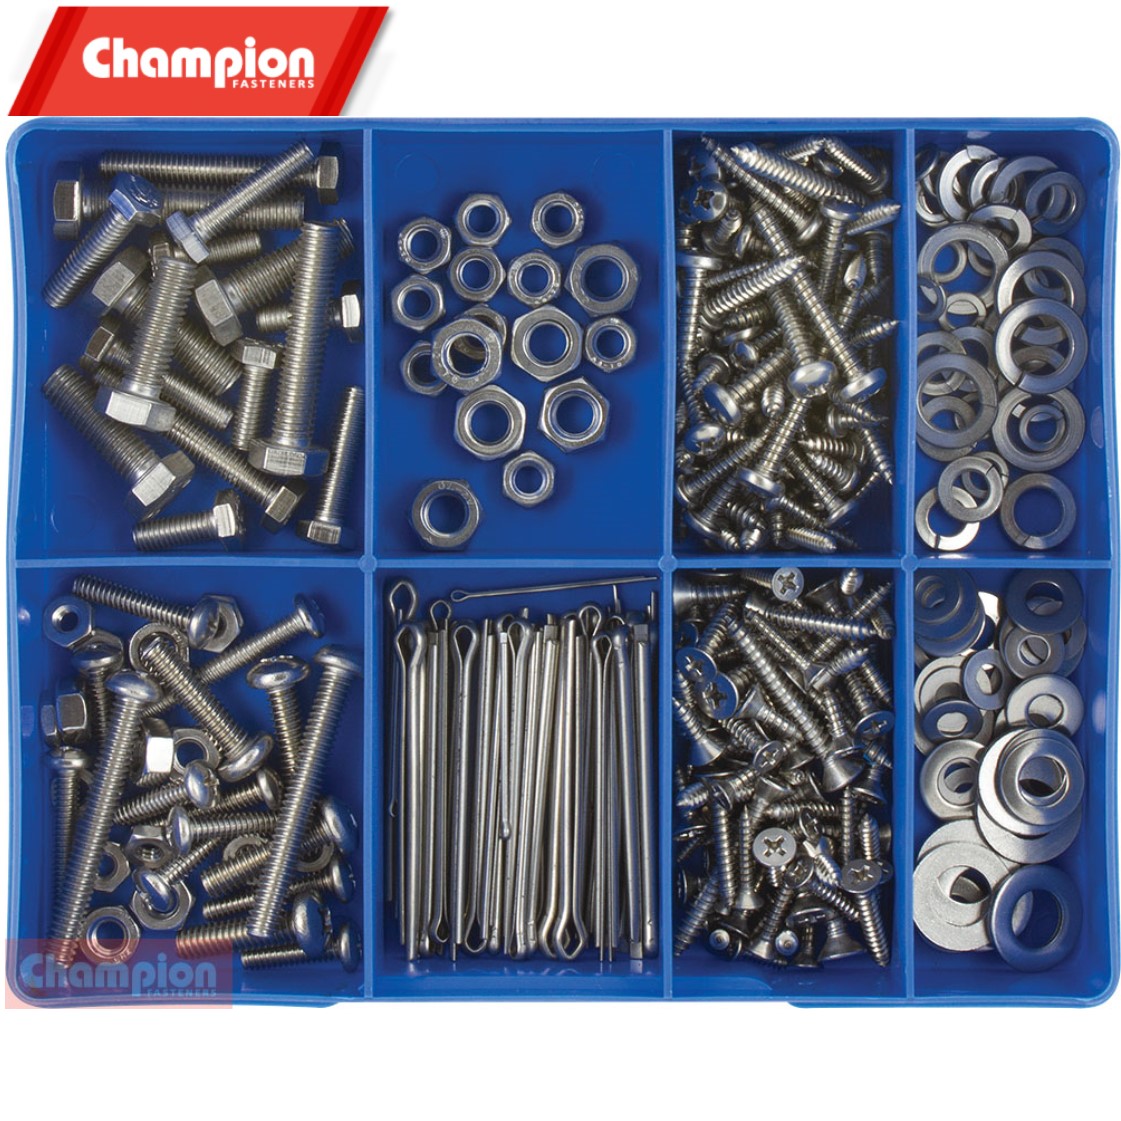 Ca1800 Champion Fasteners Stainless Steel Fastener Assortment Kit Collins Tools And Welding 